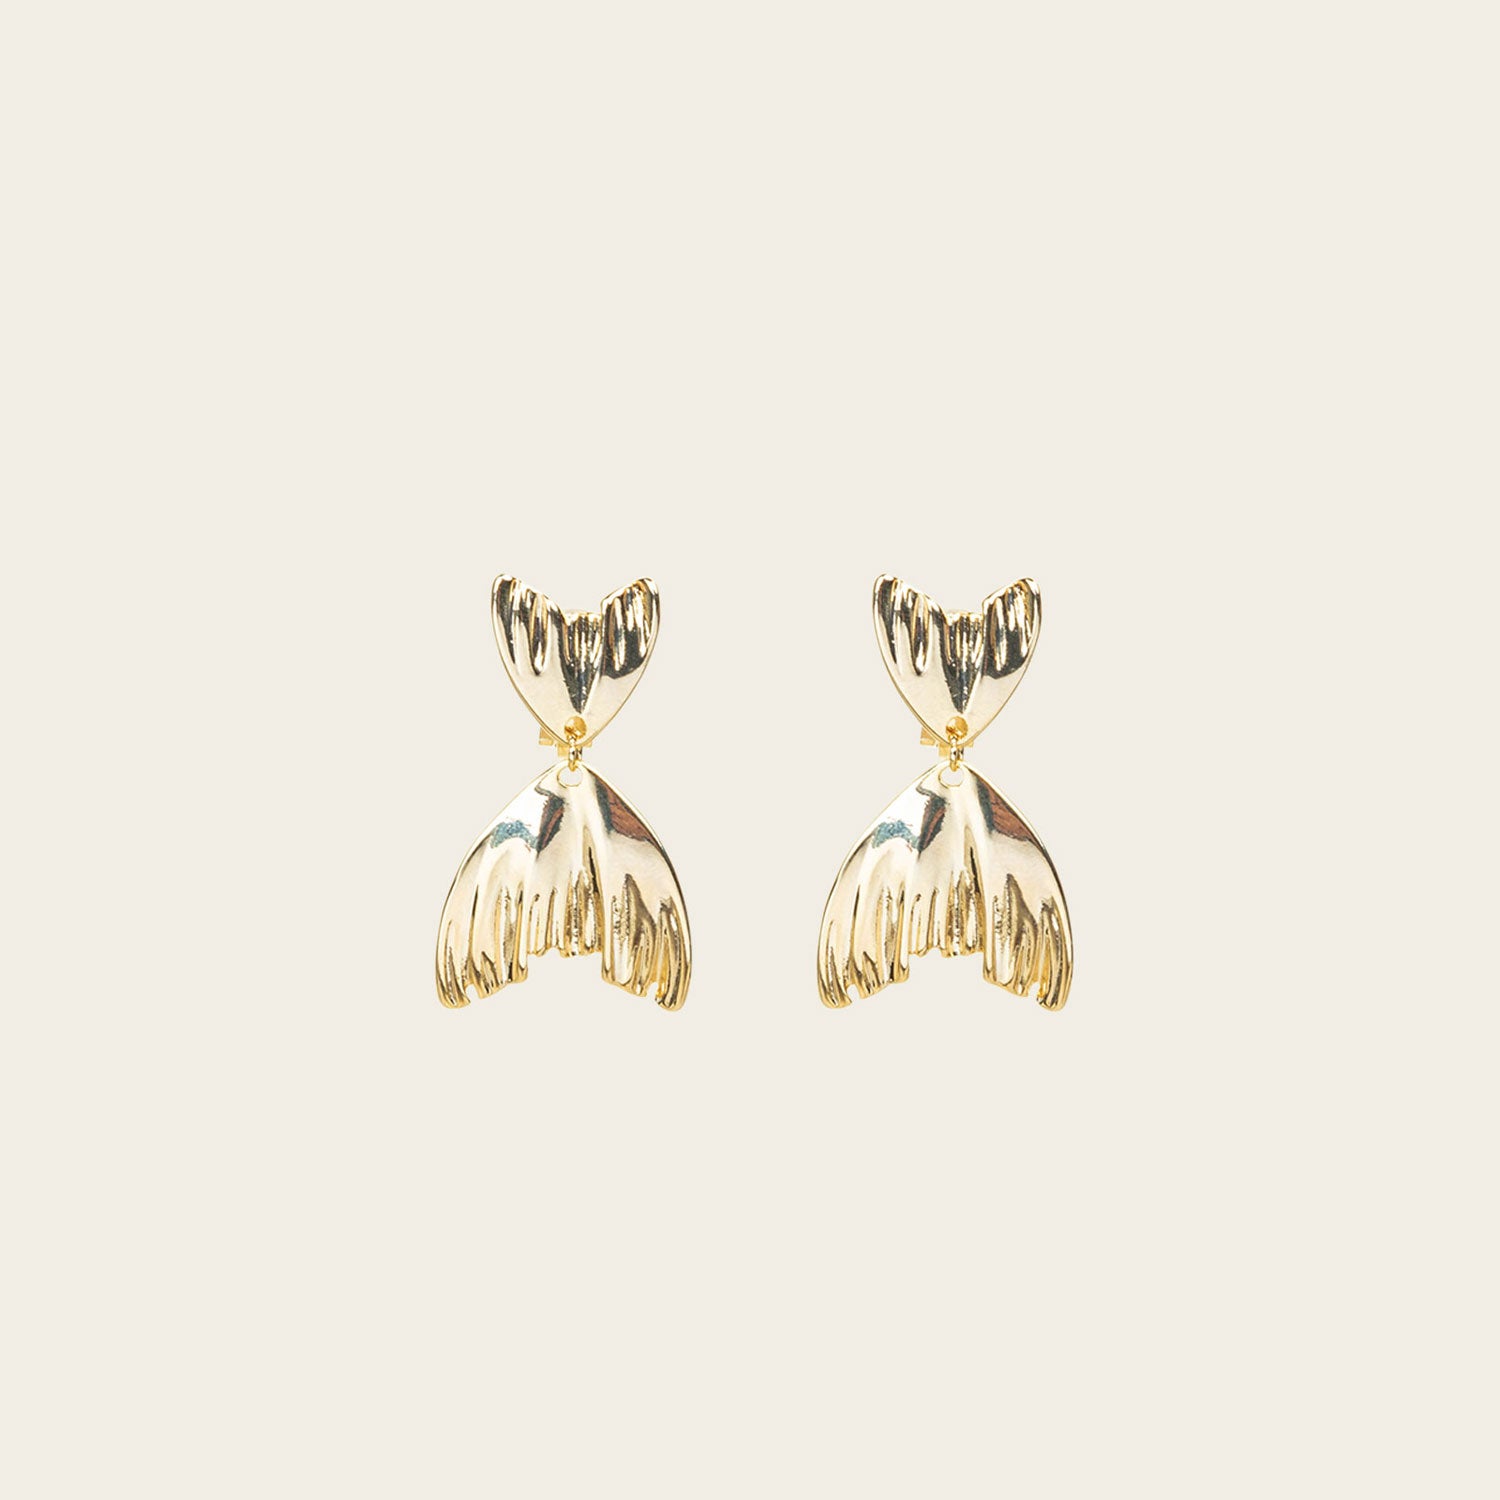 Image of the Mermaid Tail Clip On Earrings in Gold are perfect for all ear types including thick/large ears, sensitive ears, small/thin ears, and stretched/healing ears. With a zinc alloy body, these earrings offer a secure hold of up to 8-12 hours and come with removable rubber padding. Please note, item is only one pair.